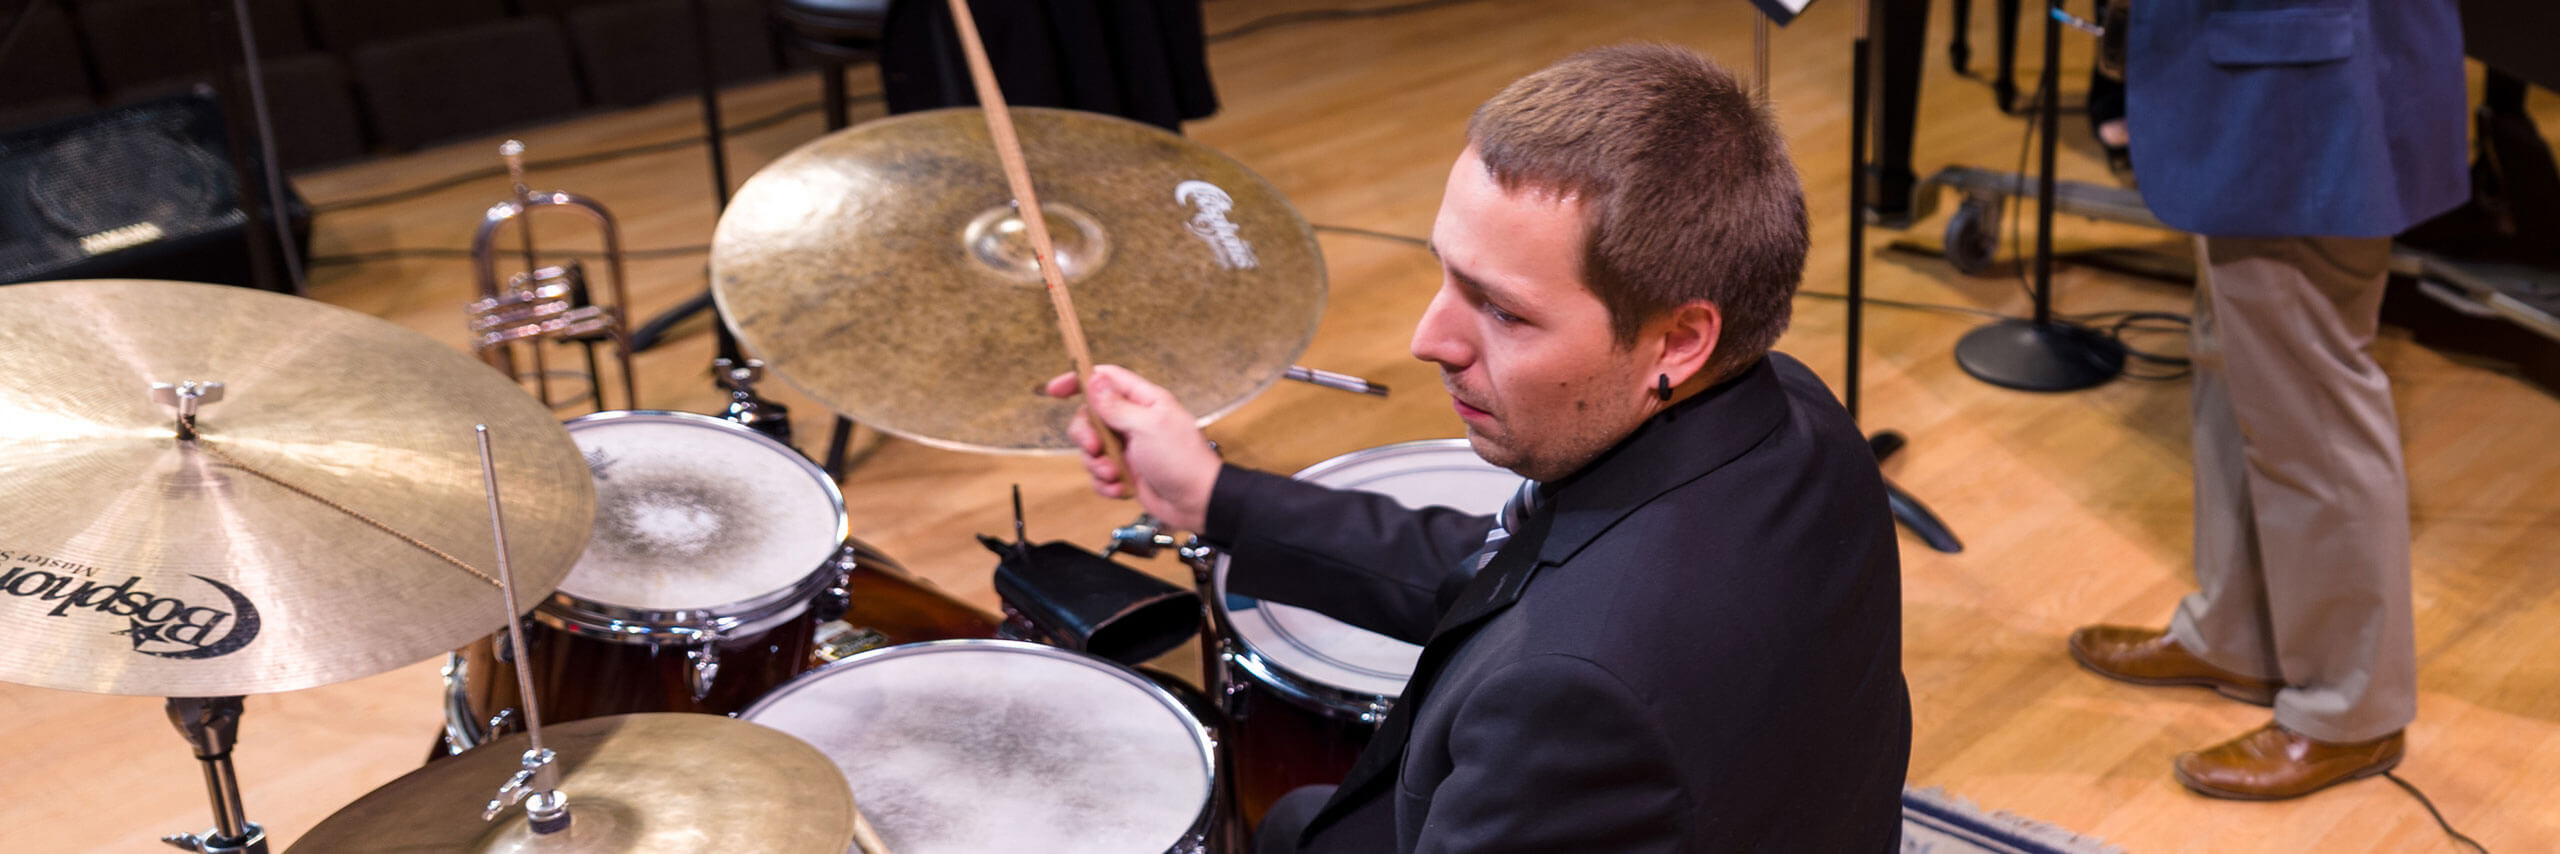 A drummer performs with the rest of the jazz band.